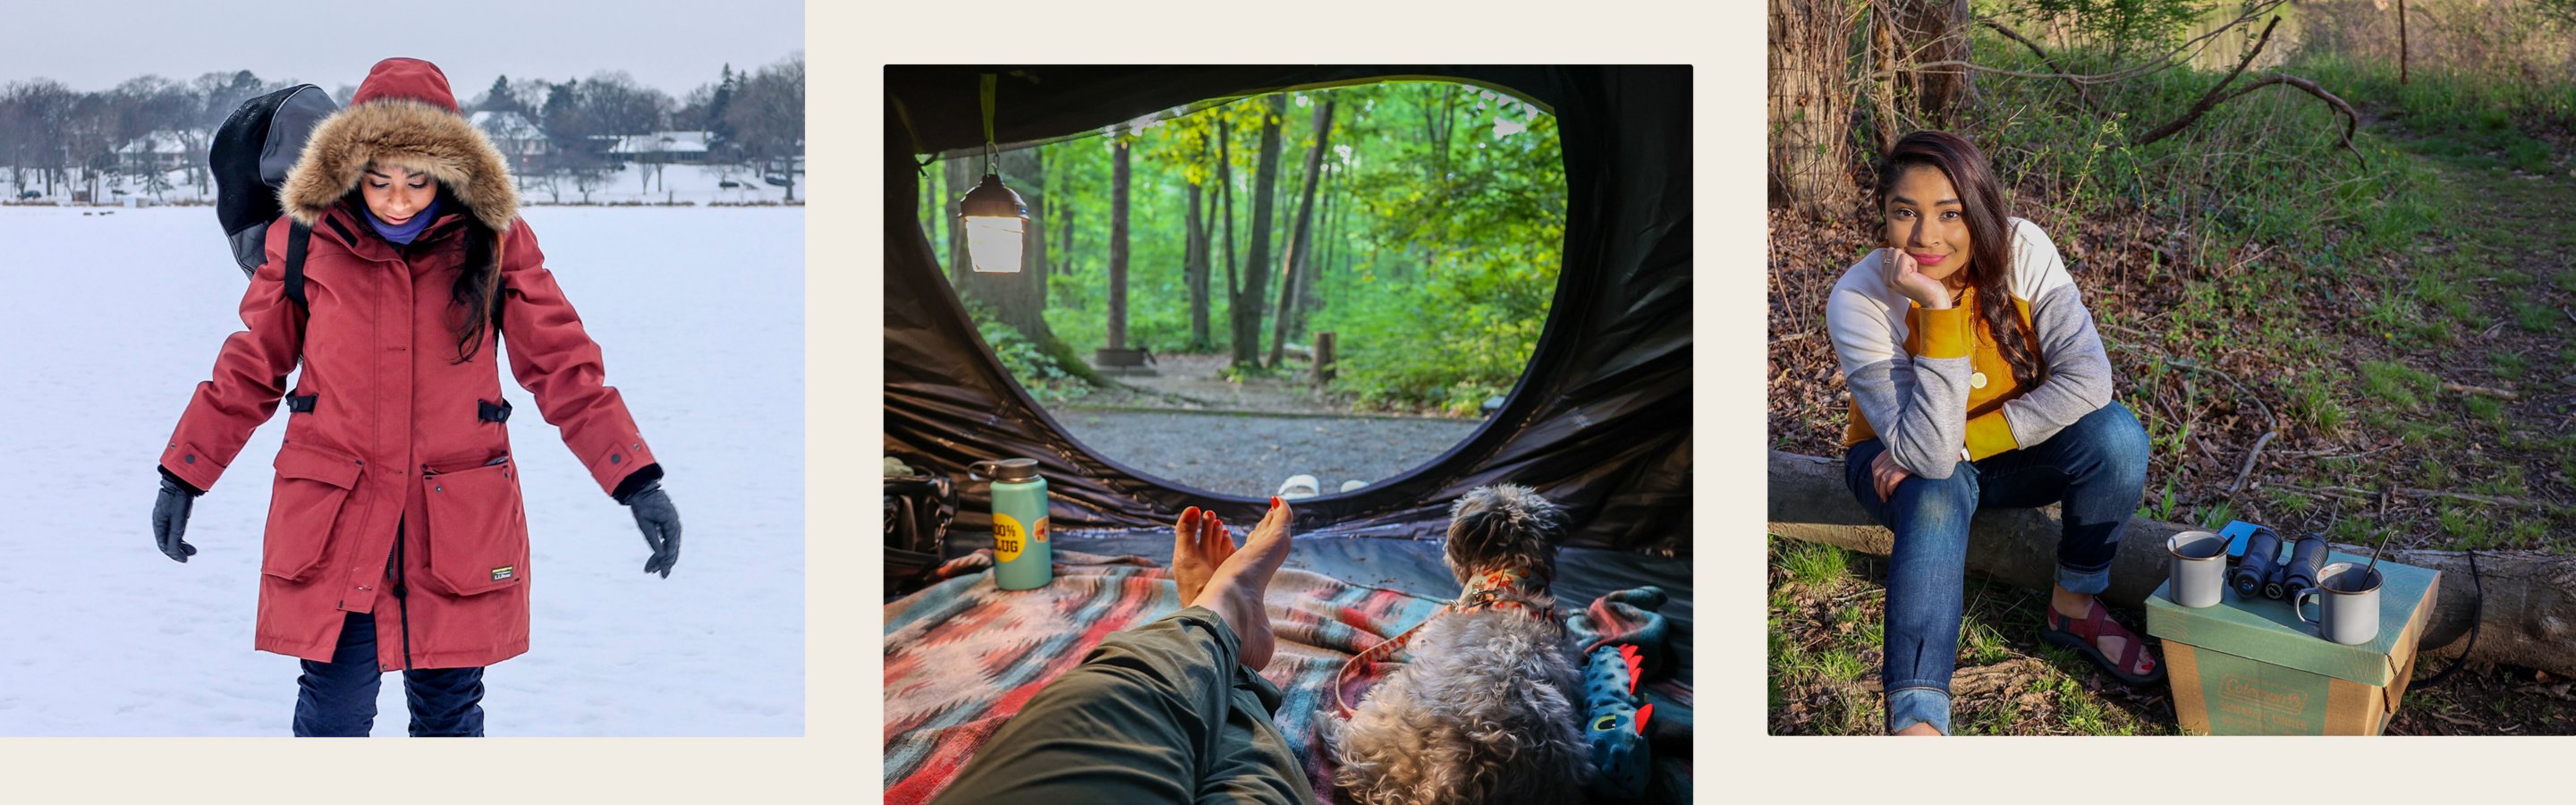 a camper using outdoor camping gear with dog outdoors